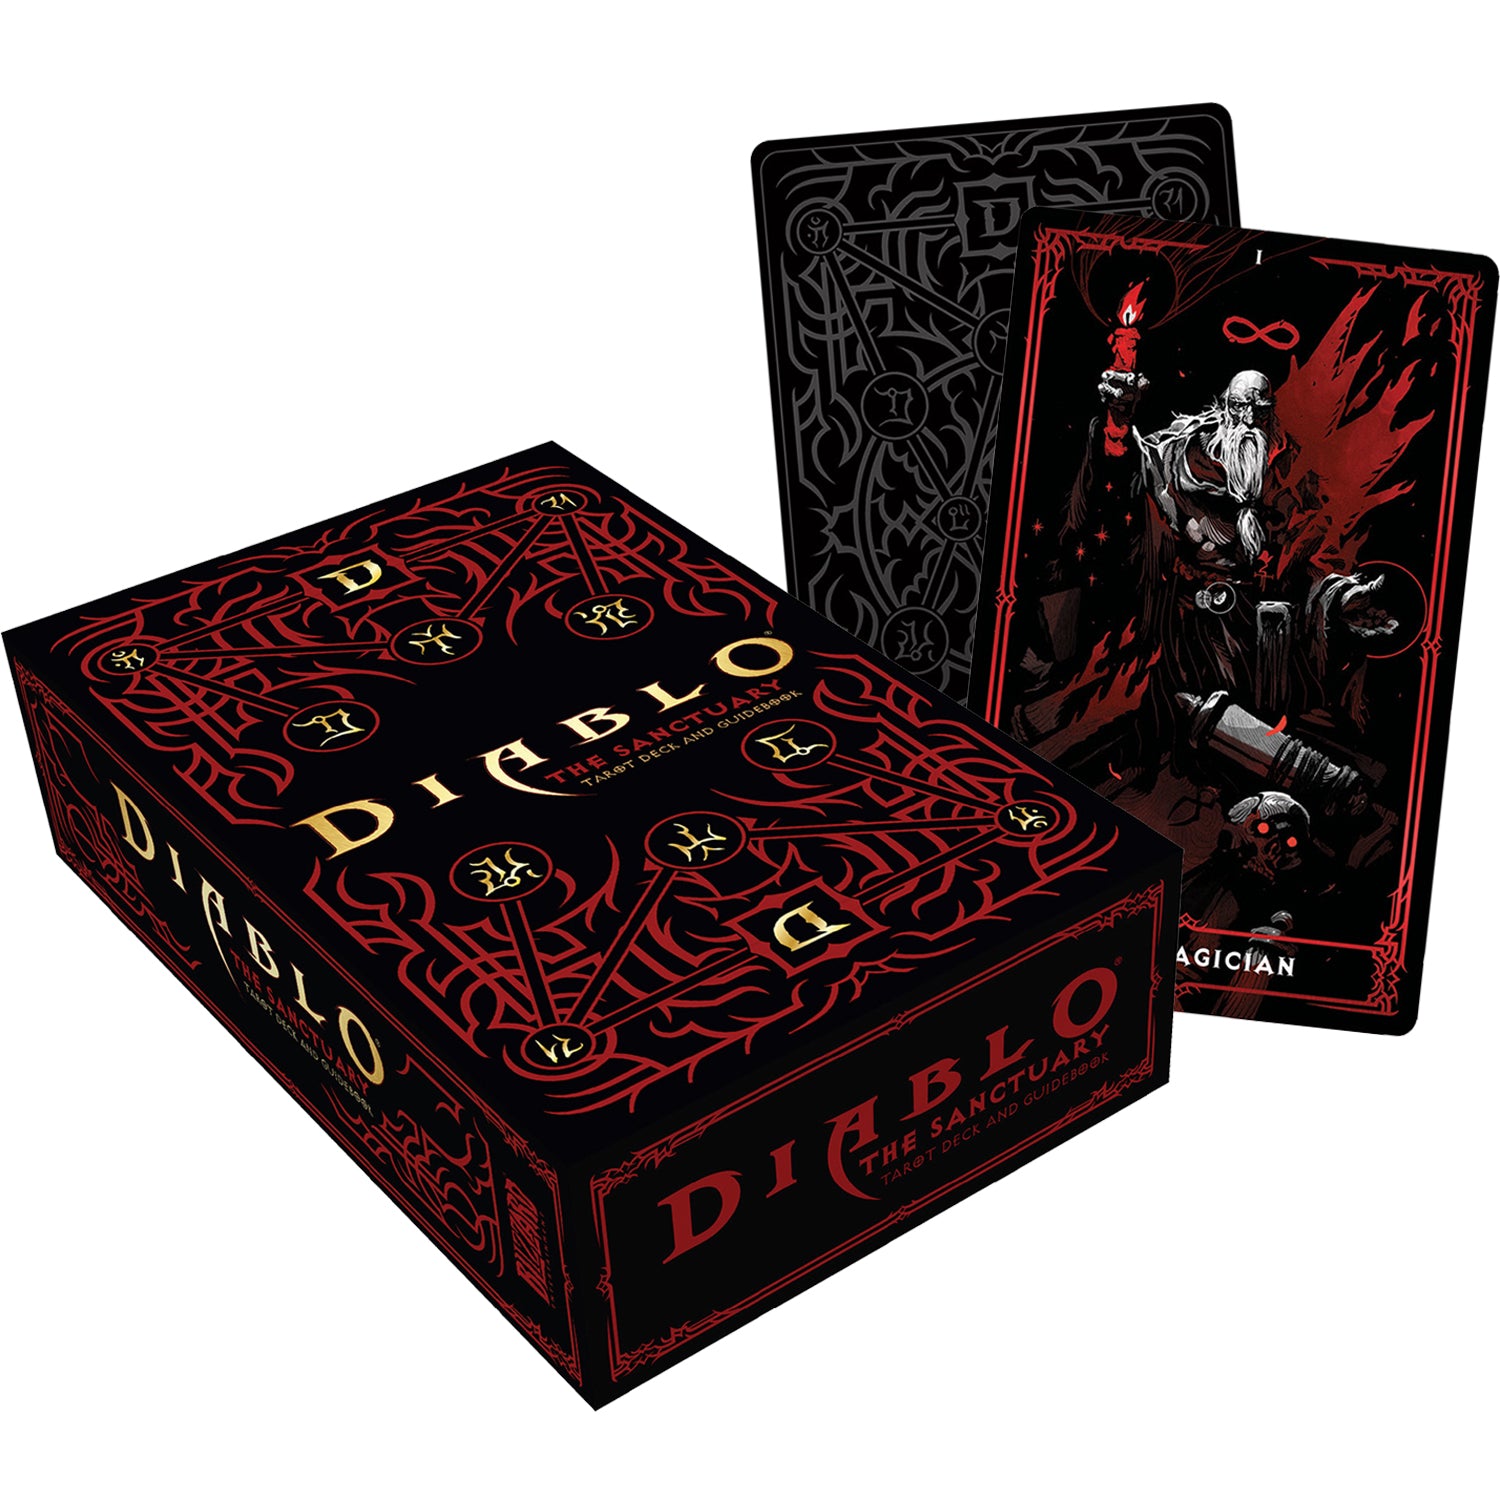 Diablo: The Sanctuary Tarot Deck and Guidebook - cover with sample card